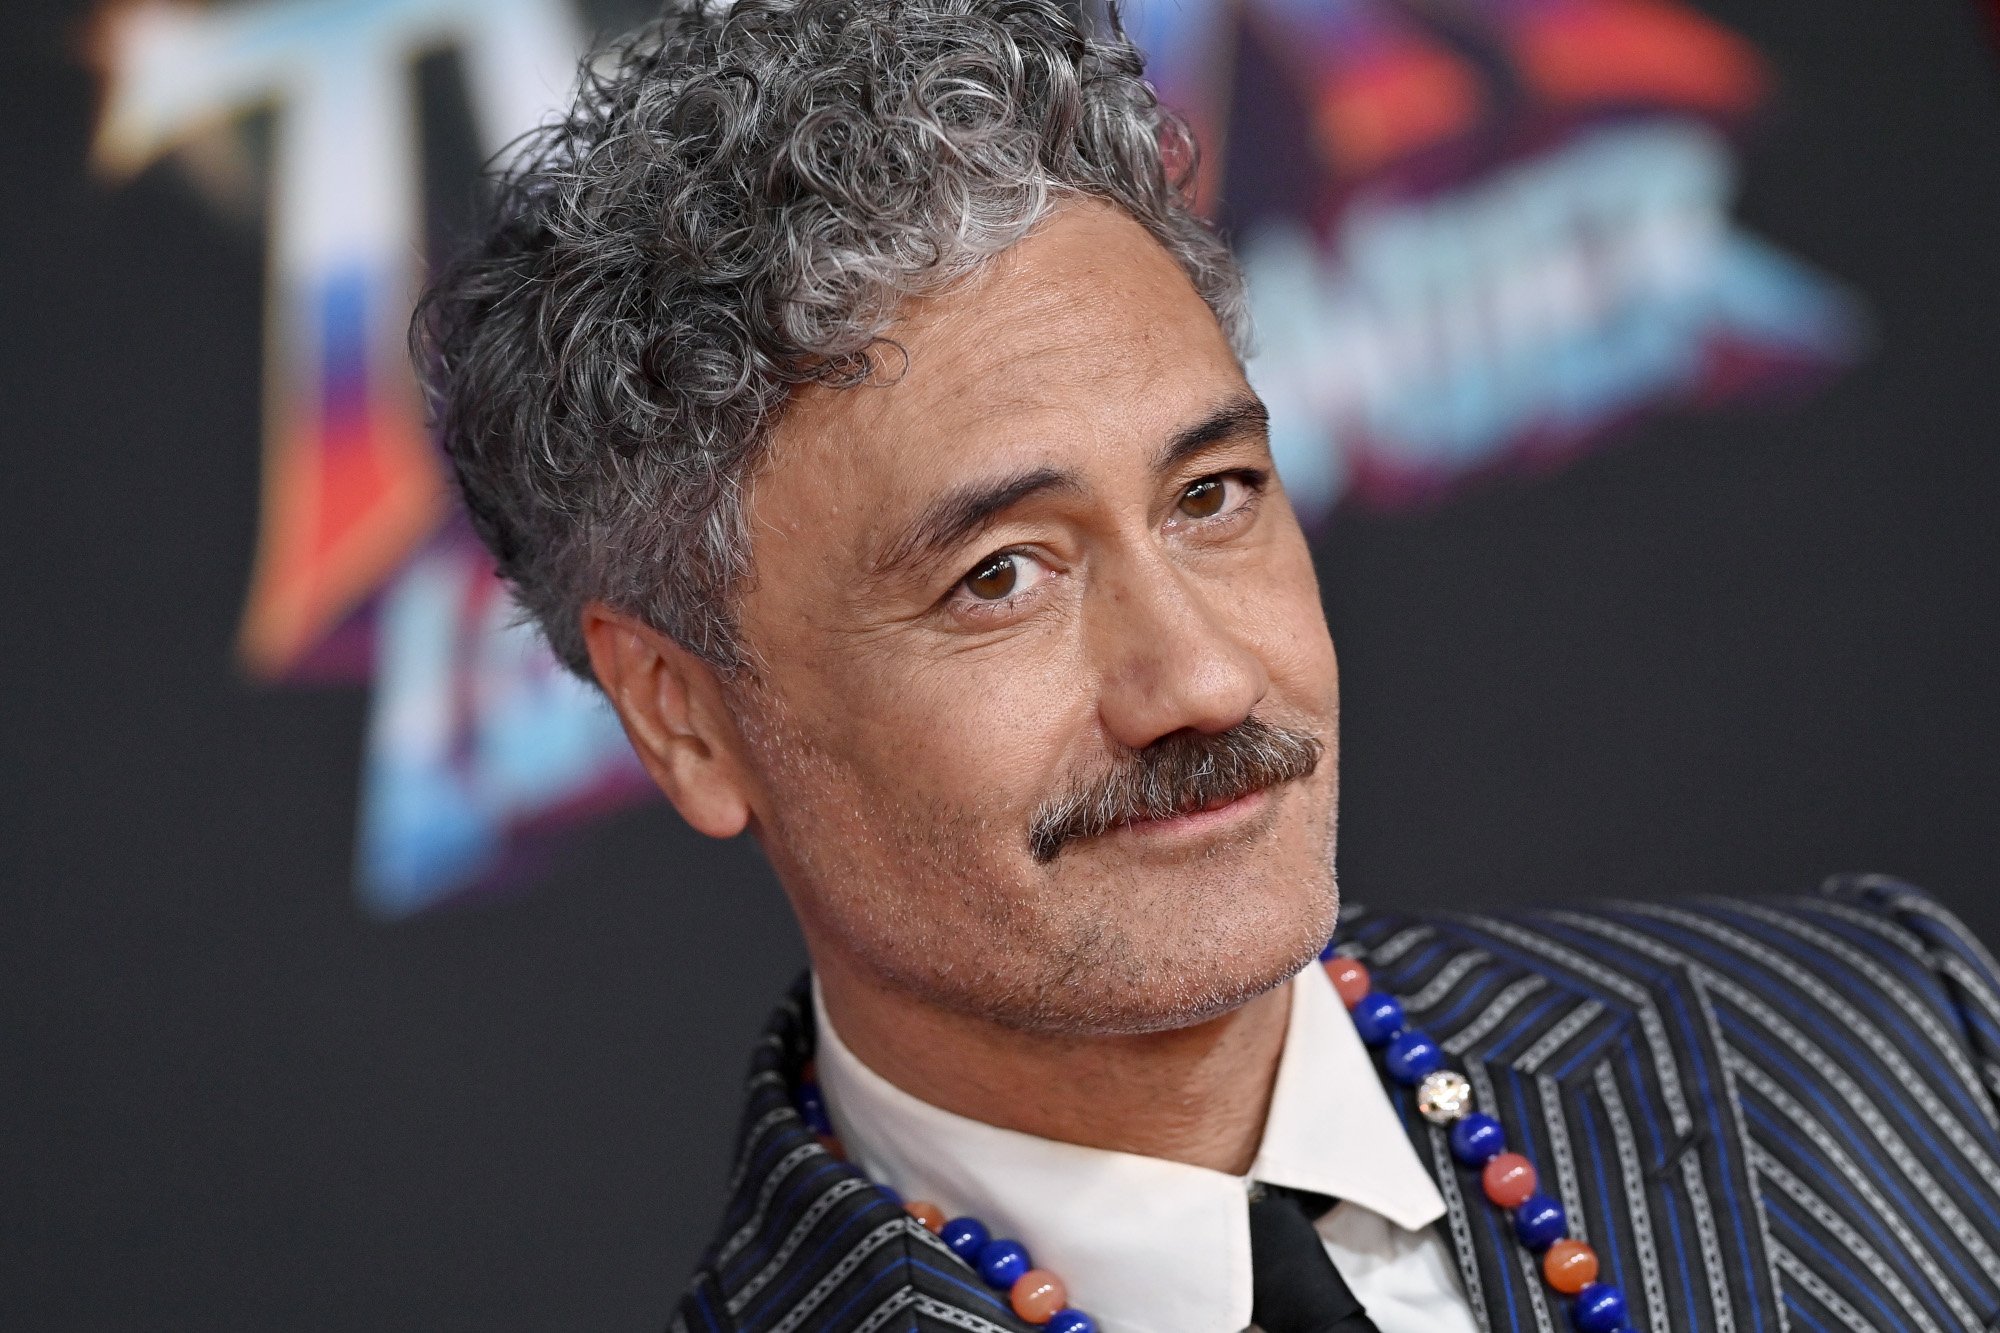 Taika Waititi, who was seen wearing a blurred-out 'One Piece' shirt, suggesting he is a fan of the anime. In this photo, he is wearing a blue, white, and black suit and smiling.